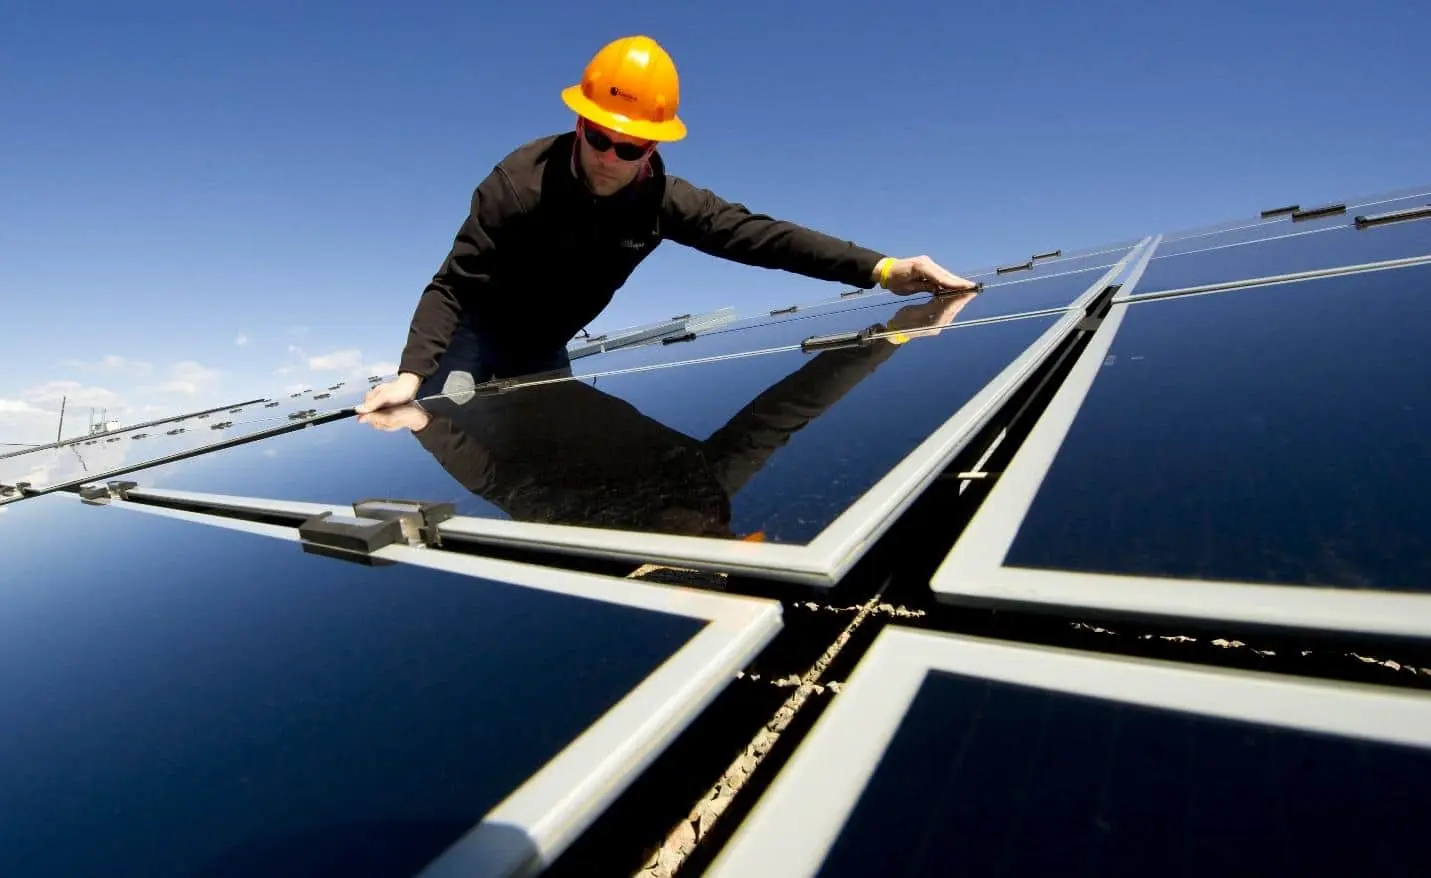 how do you dispose of solar panels - What can you do with a broken solar panel